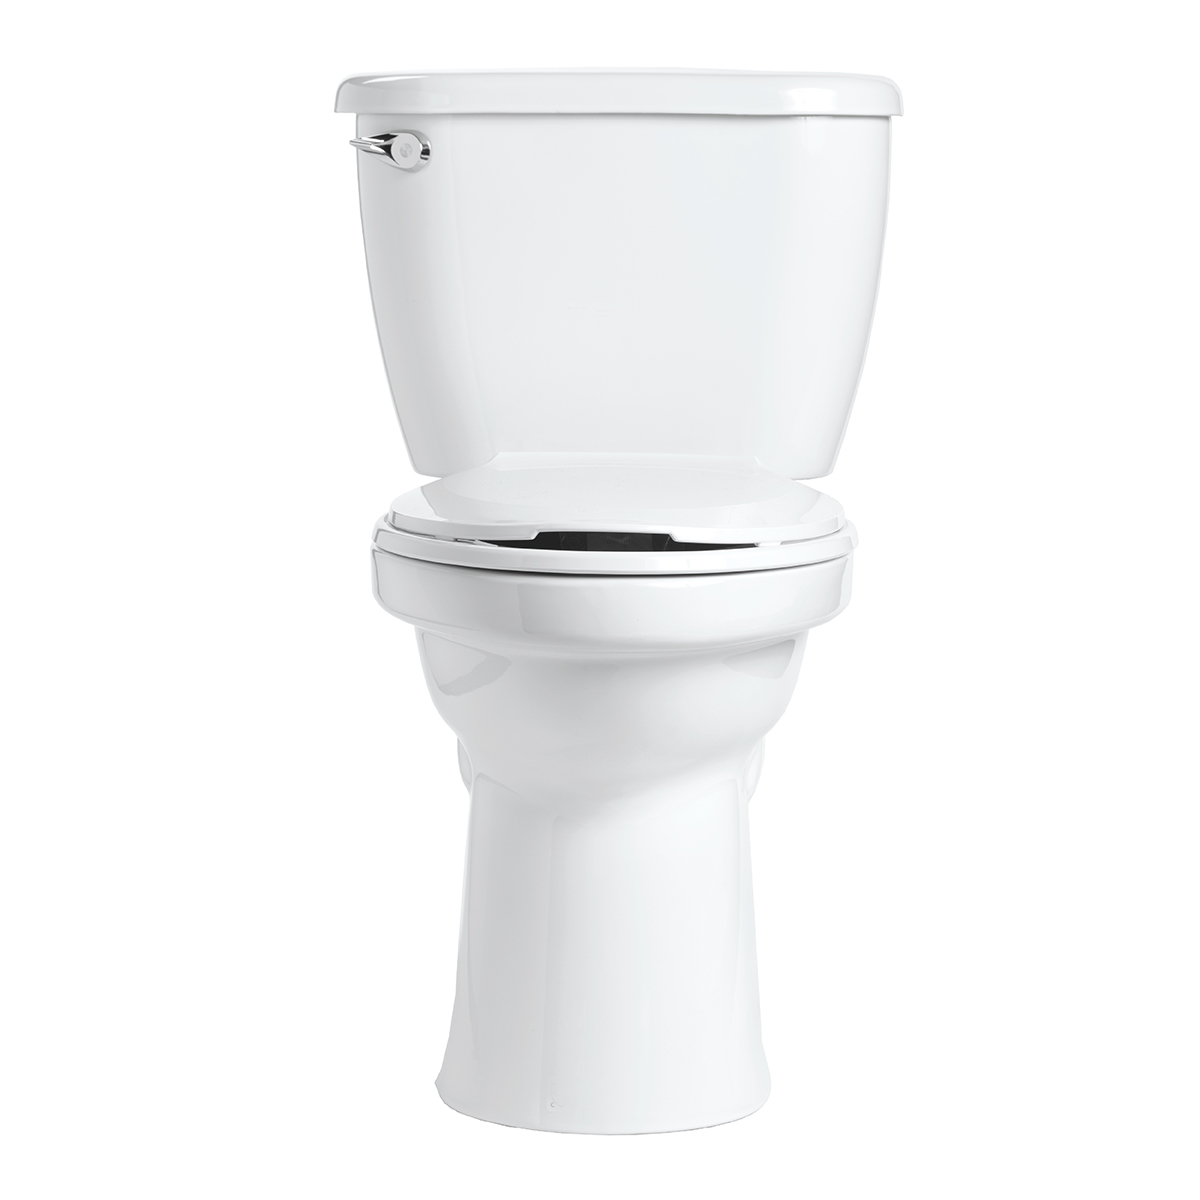 Toilet Tank ONLY Mansfield Plumbing 3816 Cascade 1.28 White 